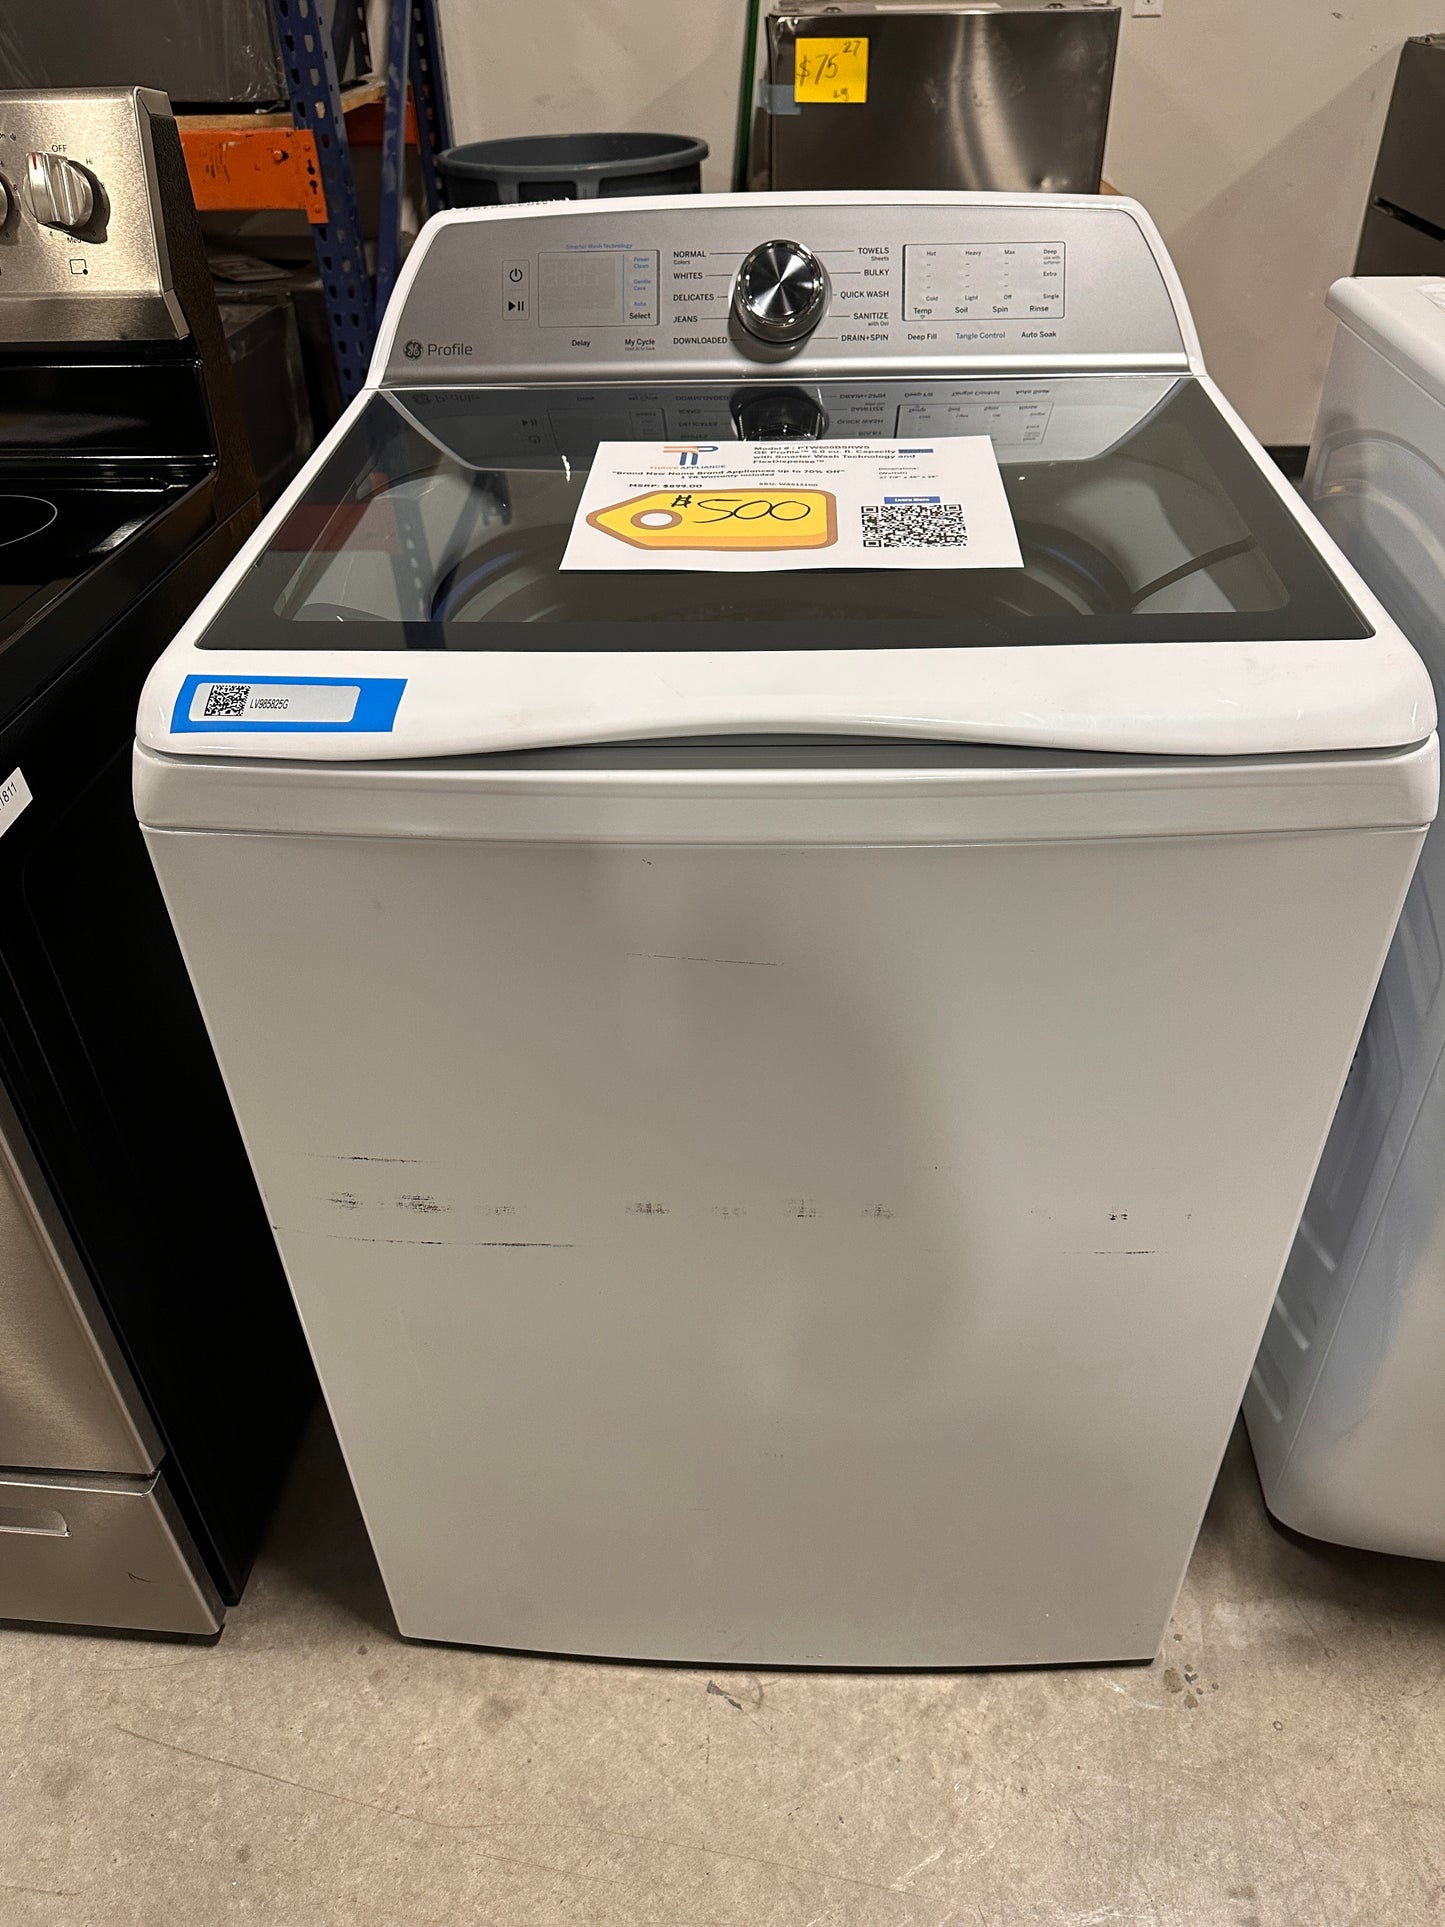 NEW GE PROFILE SMART TOP LOAD WASHING MACHINE Model:PTW600BSRWS  WAS13100